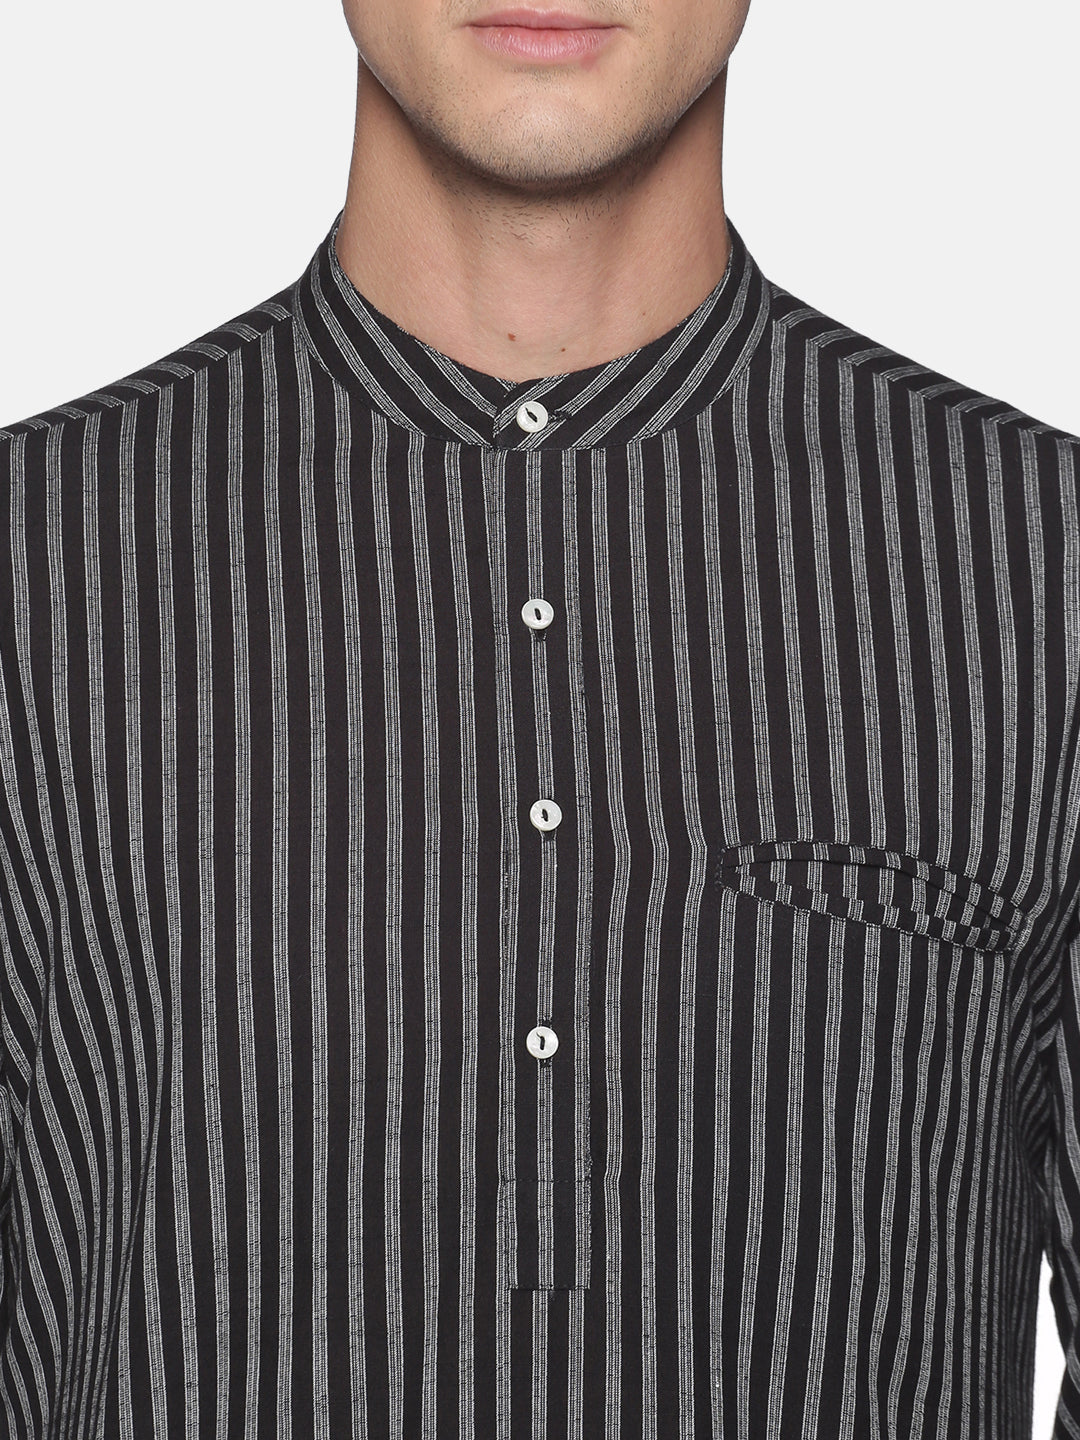 Black striped kurta with front and both side pockets